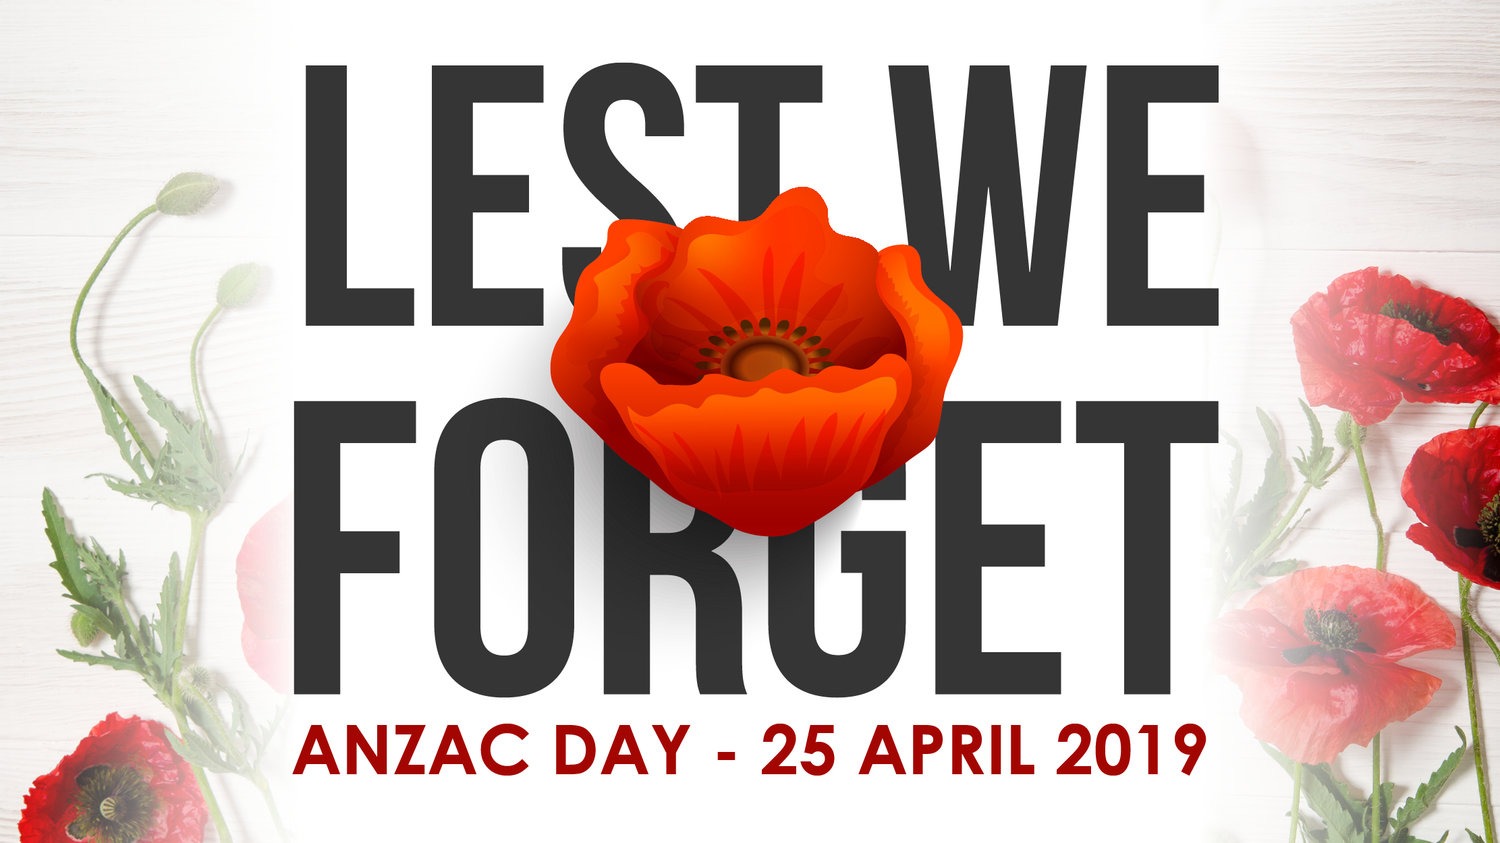 Anzac-Day-Event-2019